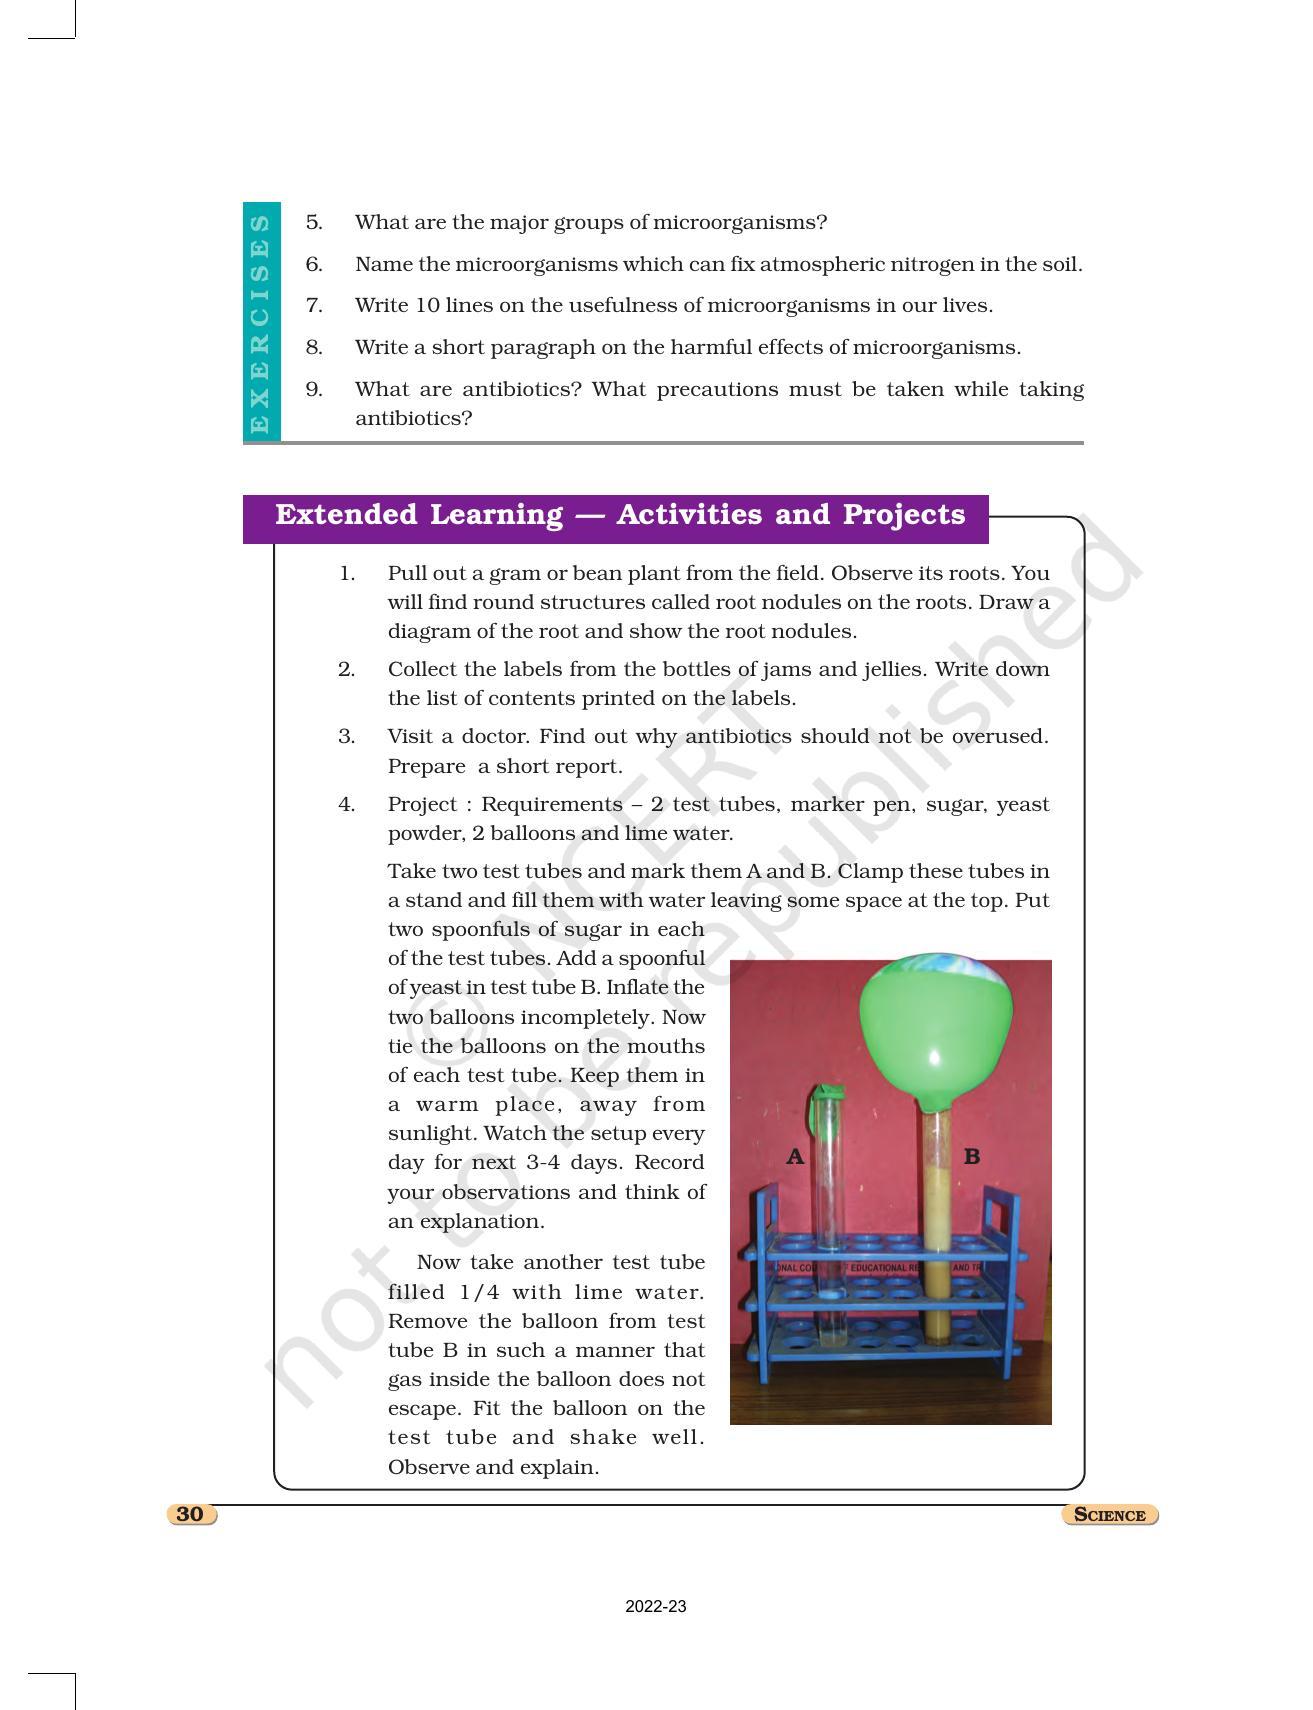 NCERT Book for Class 8 Science Chapter 2 Microorganisms: Friend and Foe - Page 14